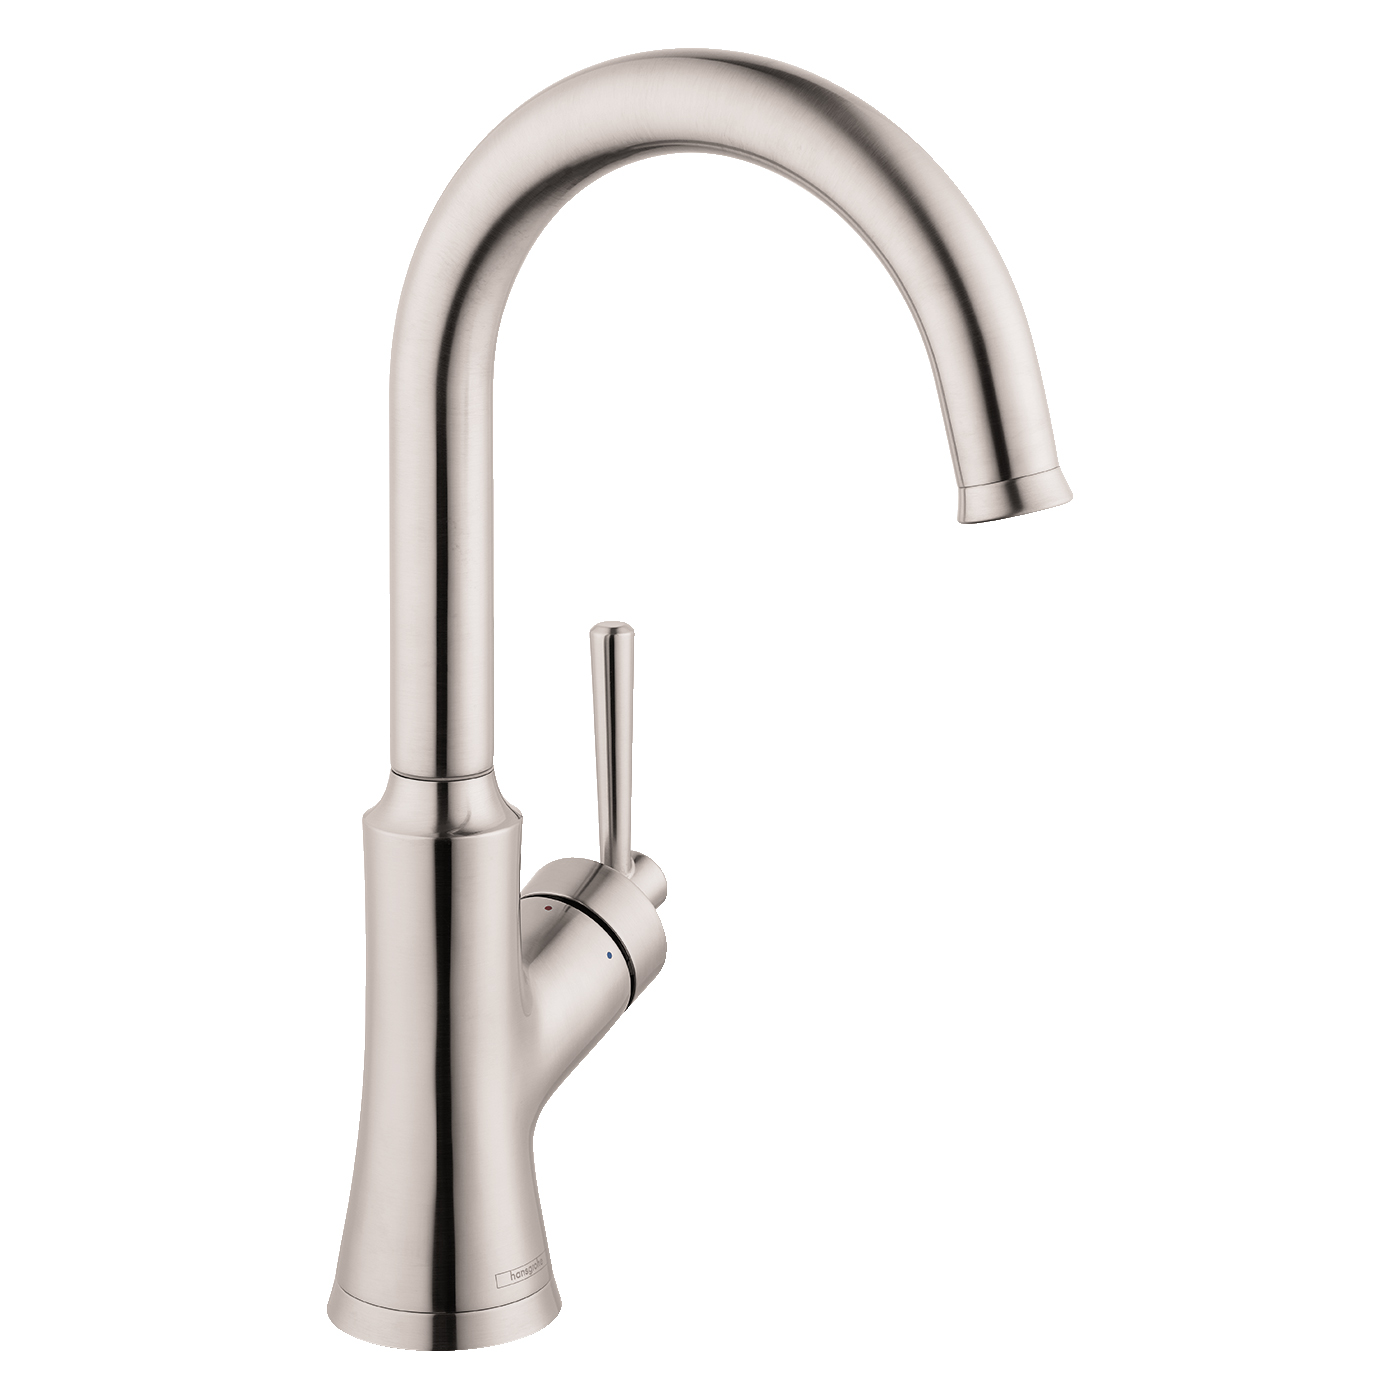 04795800 Hansgrohe Joleena Single Hole Bar Faucet, 1.5 gpm, Stainless Steel